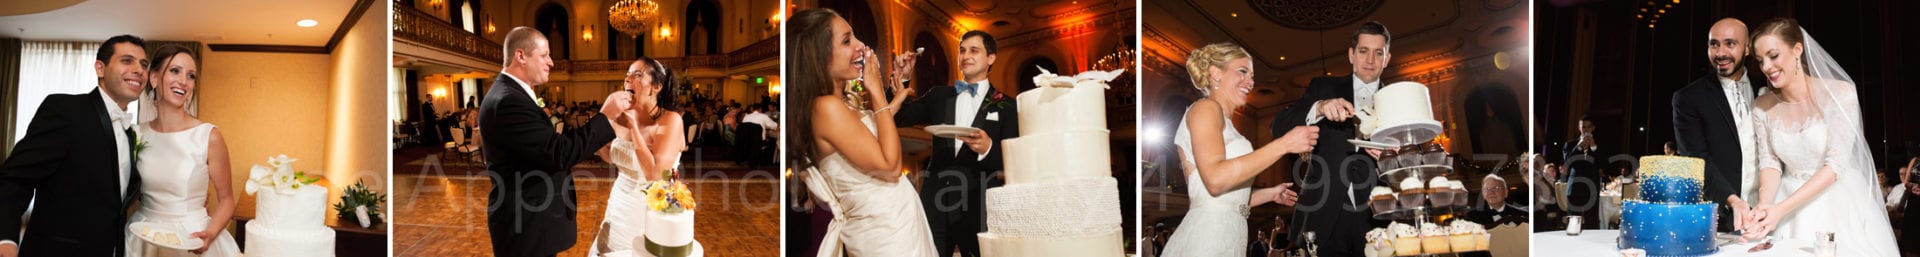 couples laugh and cut their wedding cakes